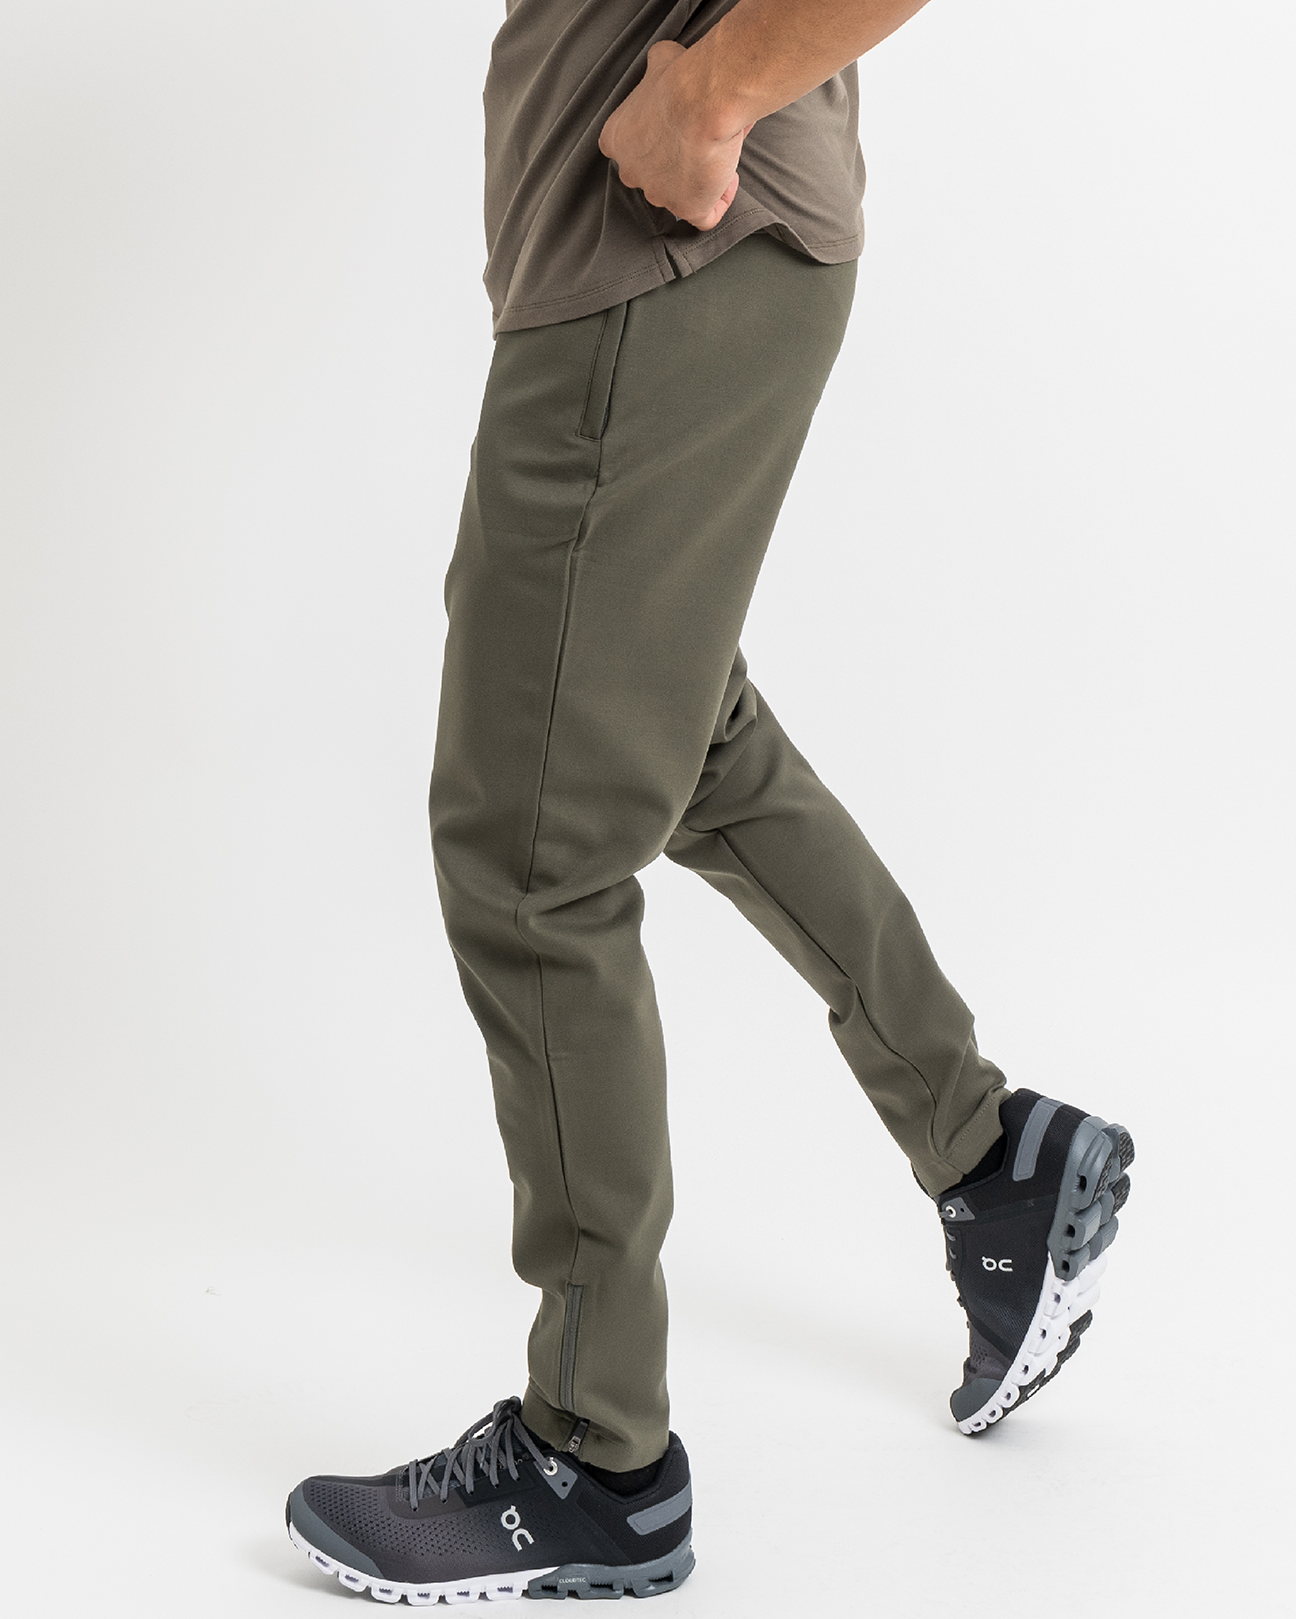 Commuter Trousers - Olive